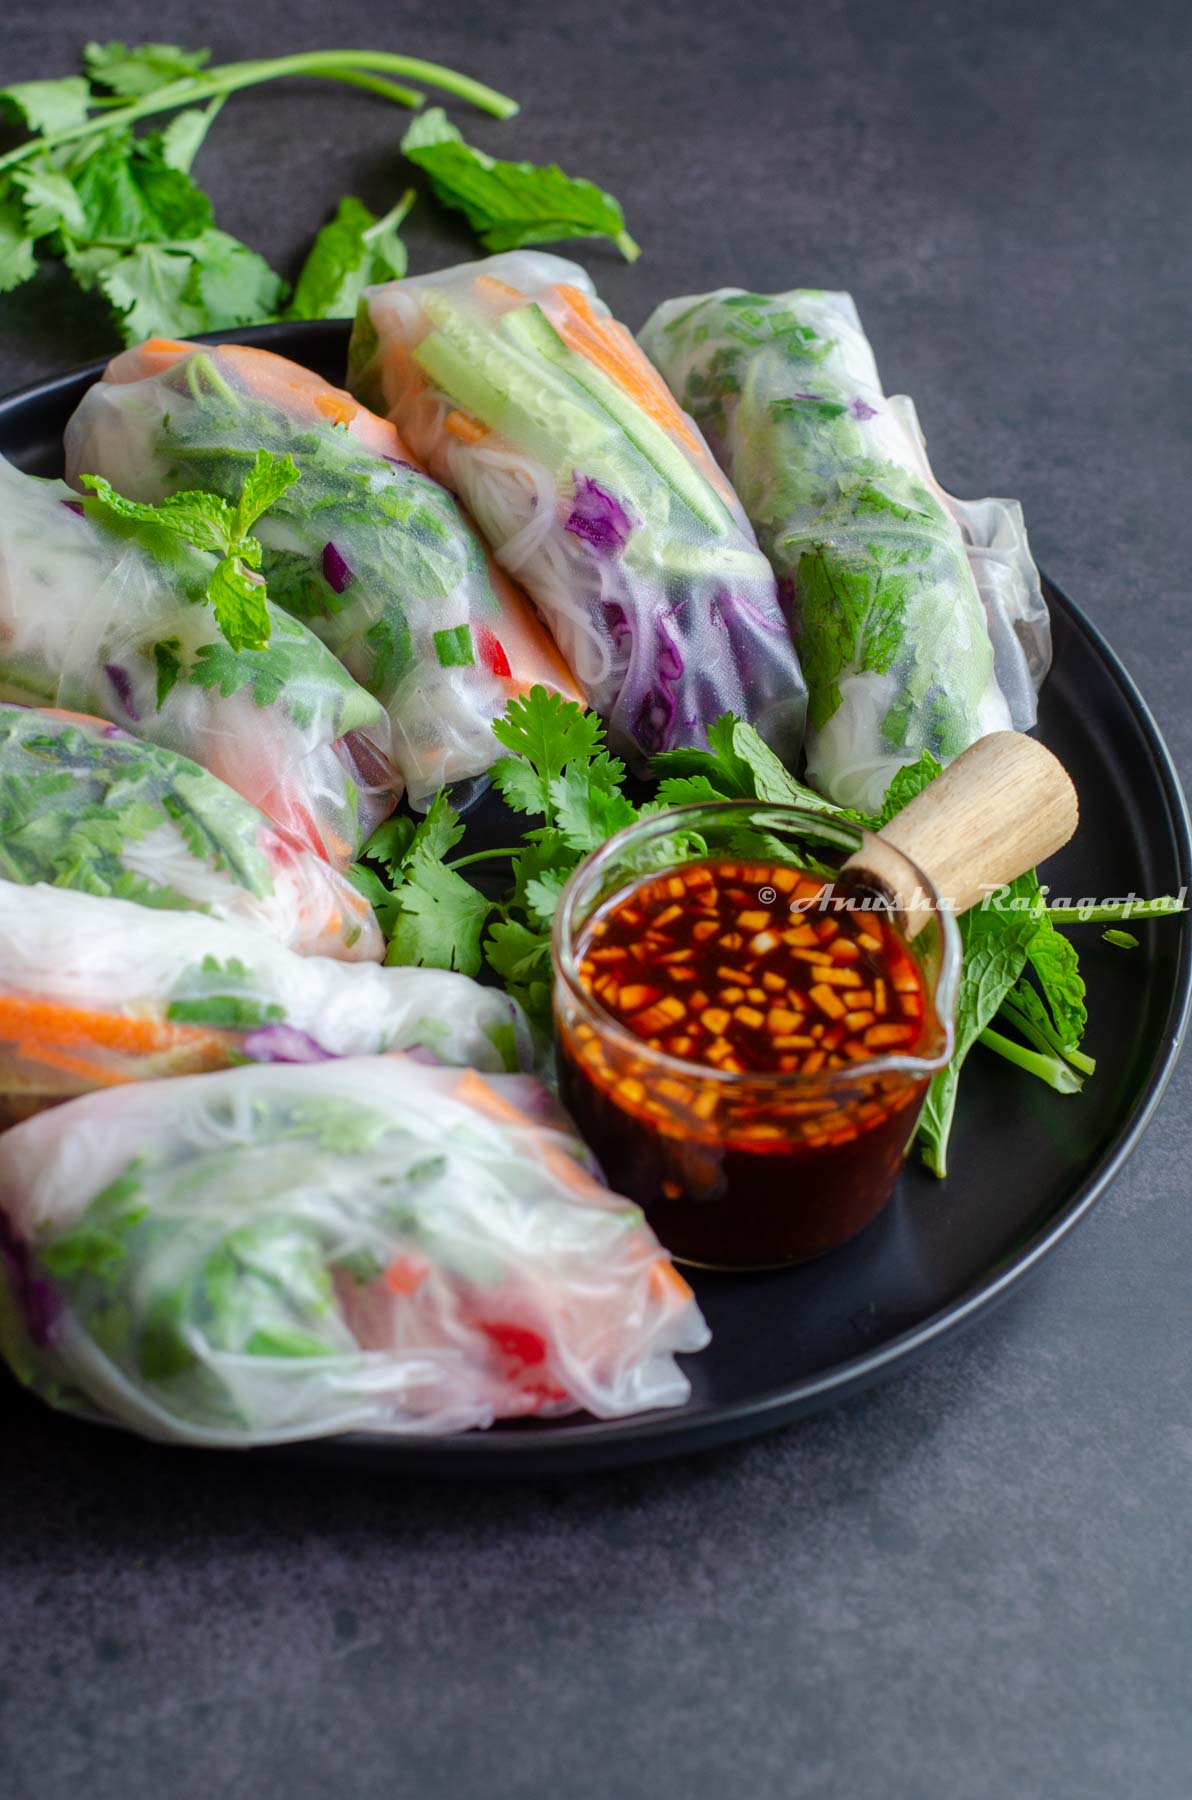 vegan summer rolls served on a black dinner plate with a small bowl of spicy dipping sauce speckled with chopped garlic.